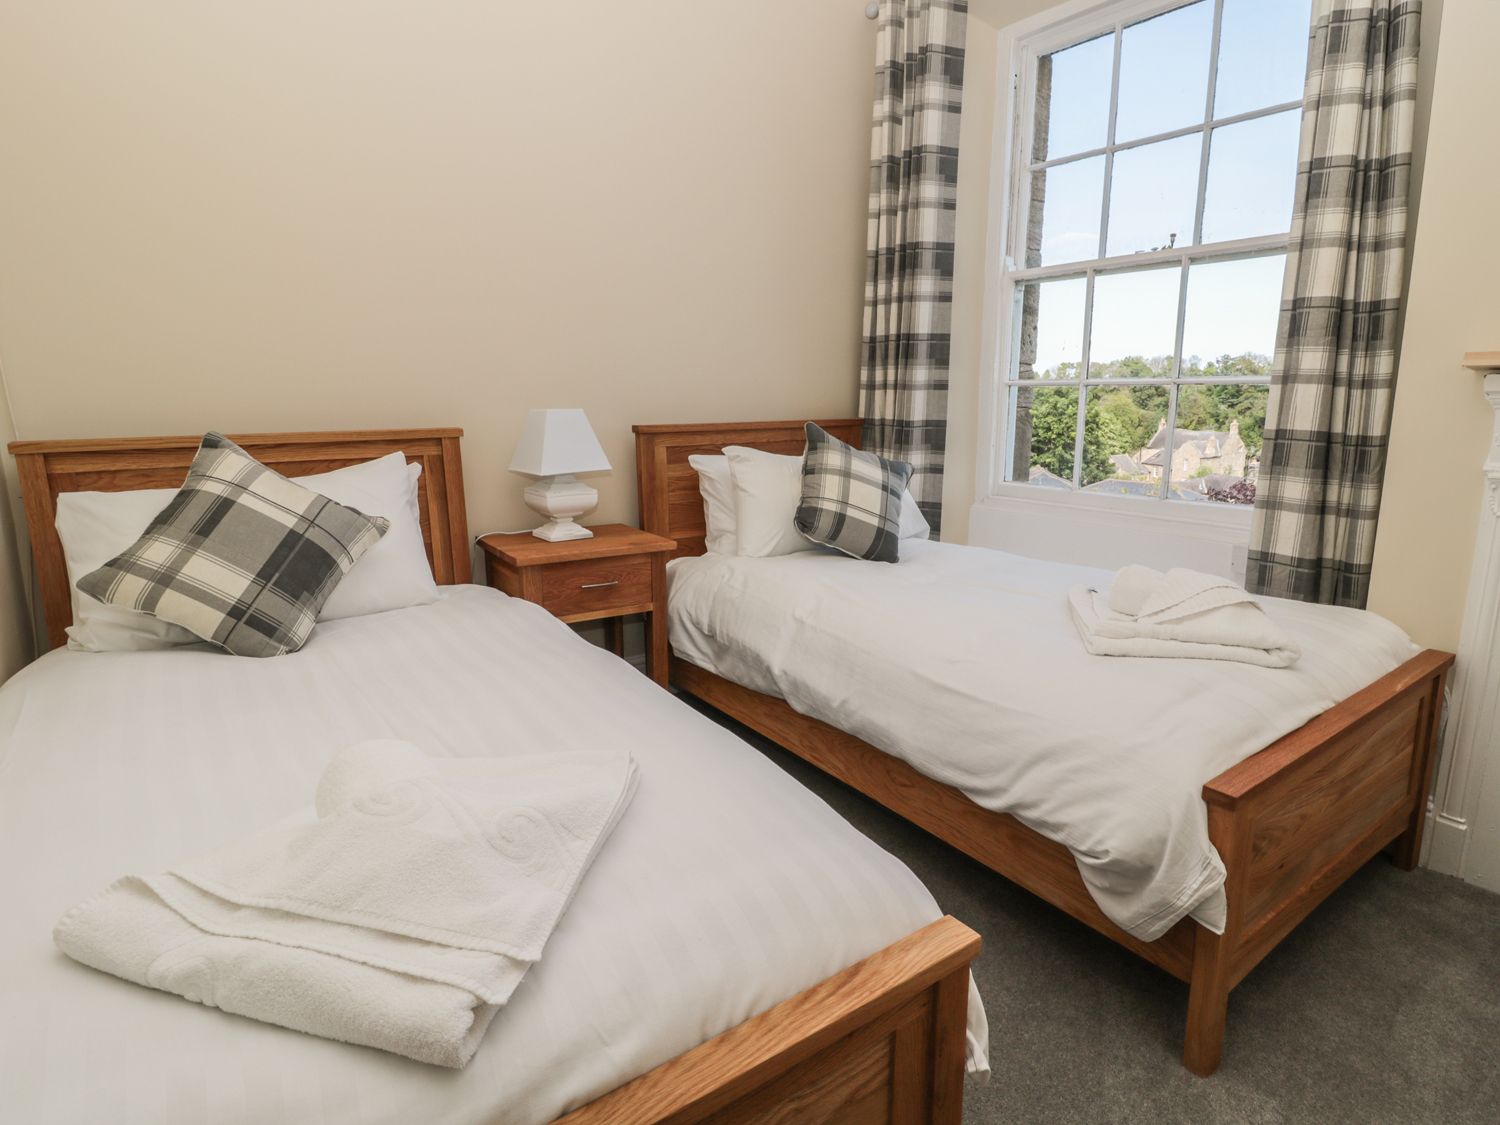 Coquet View Apartment, Northumberland